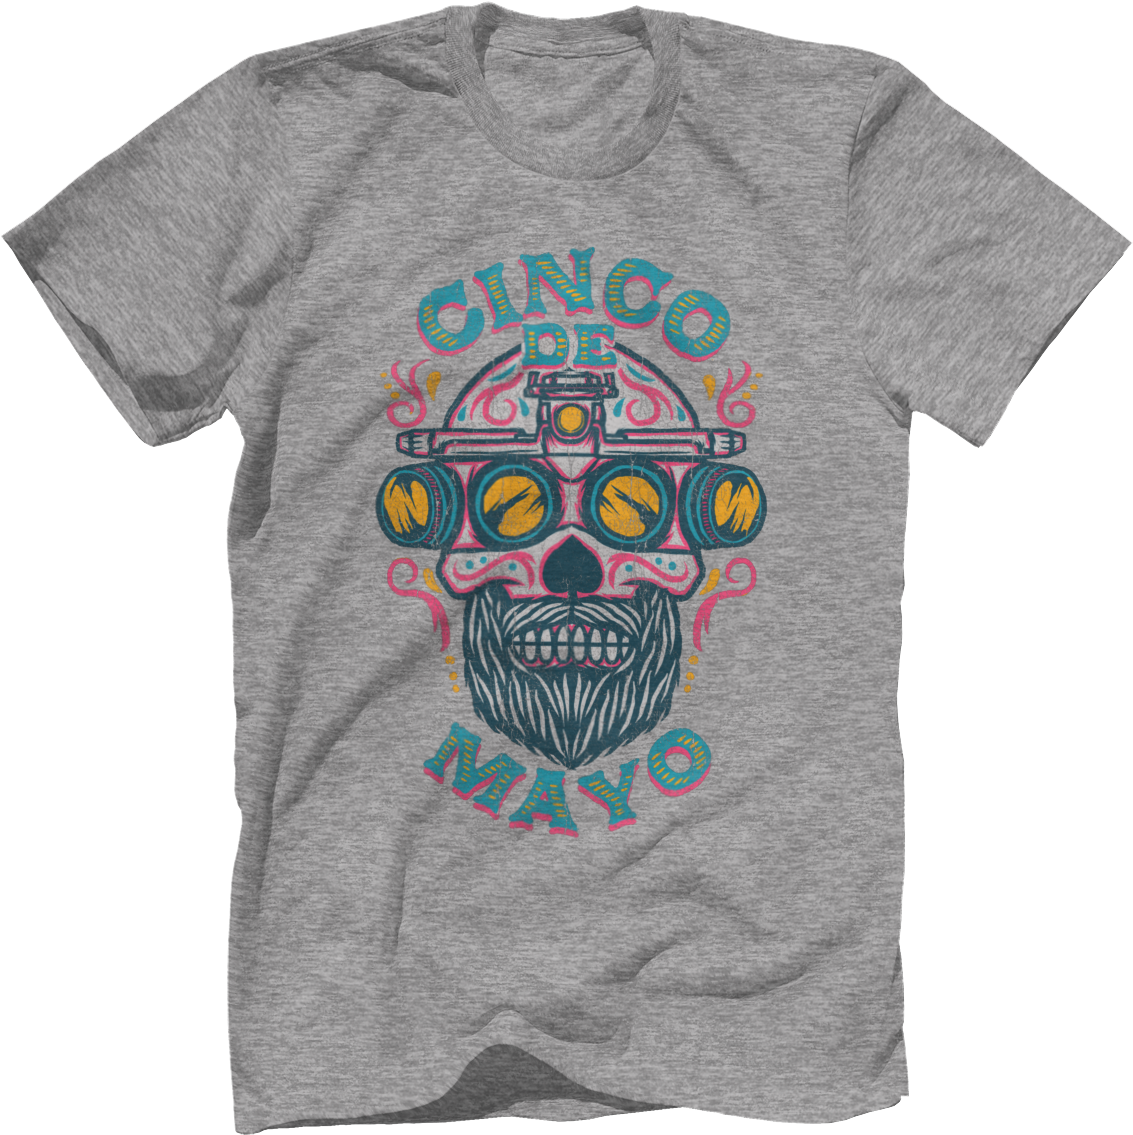 A Grey T-shirt With A Skull And Text